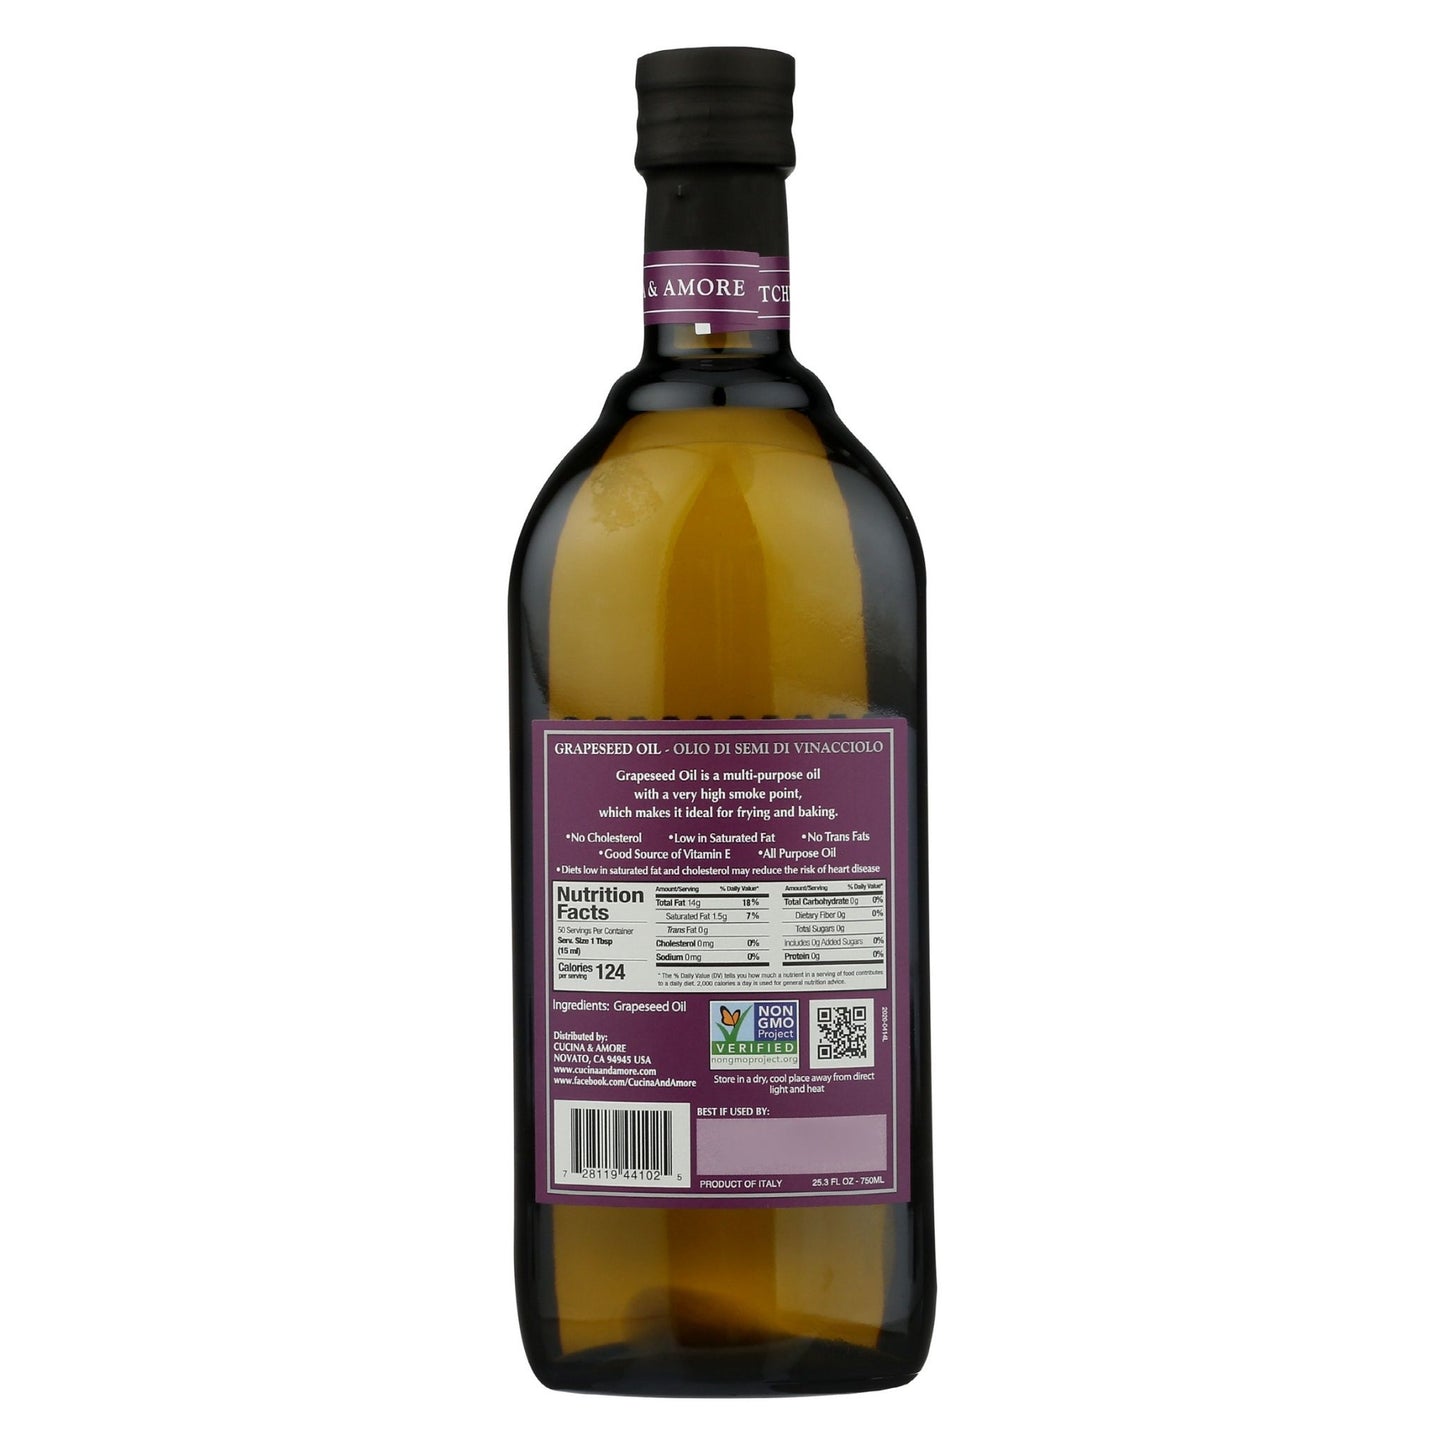 Grapeseed Oil - 2 Pack